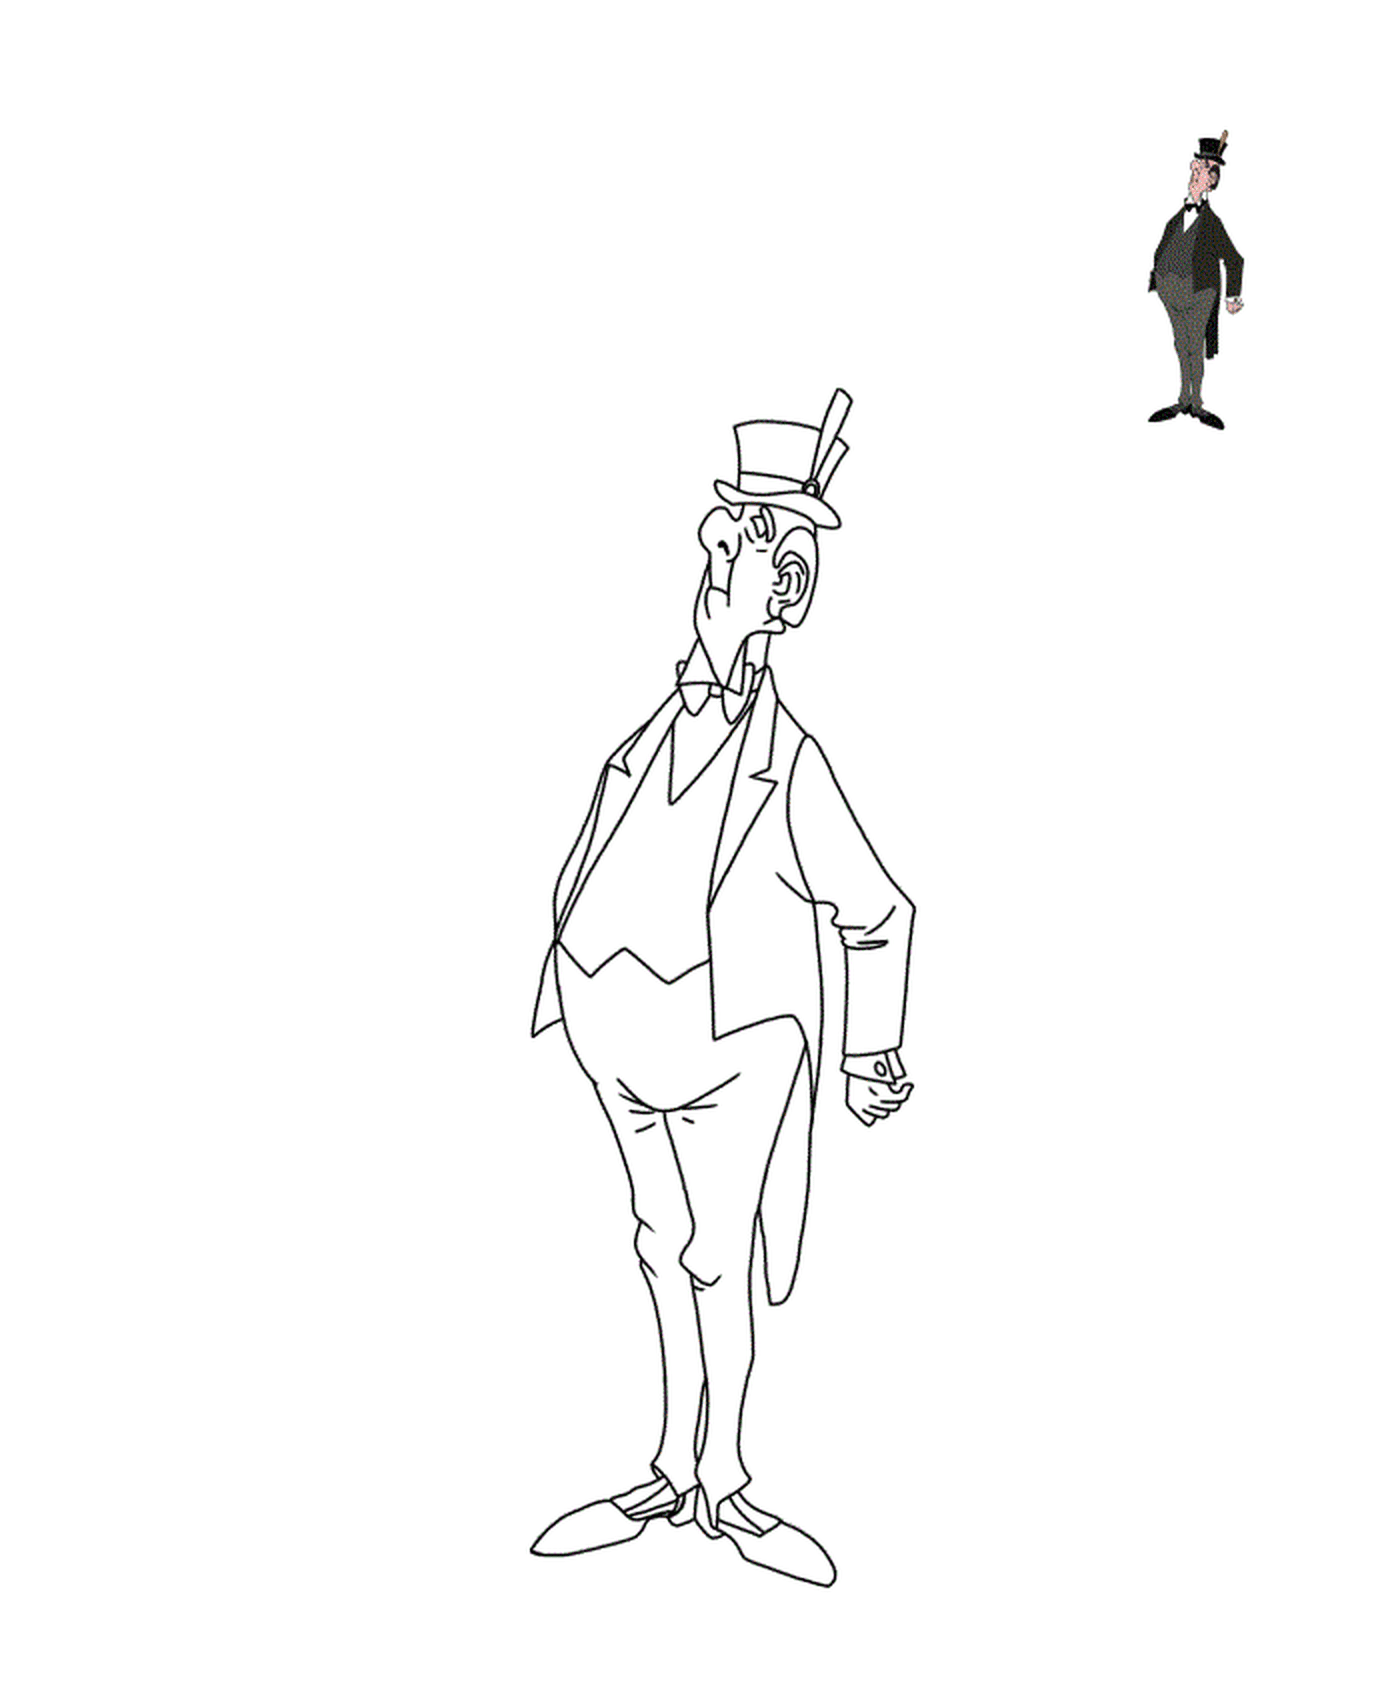  A man with a top hat and a suit 